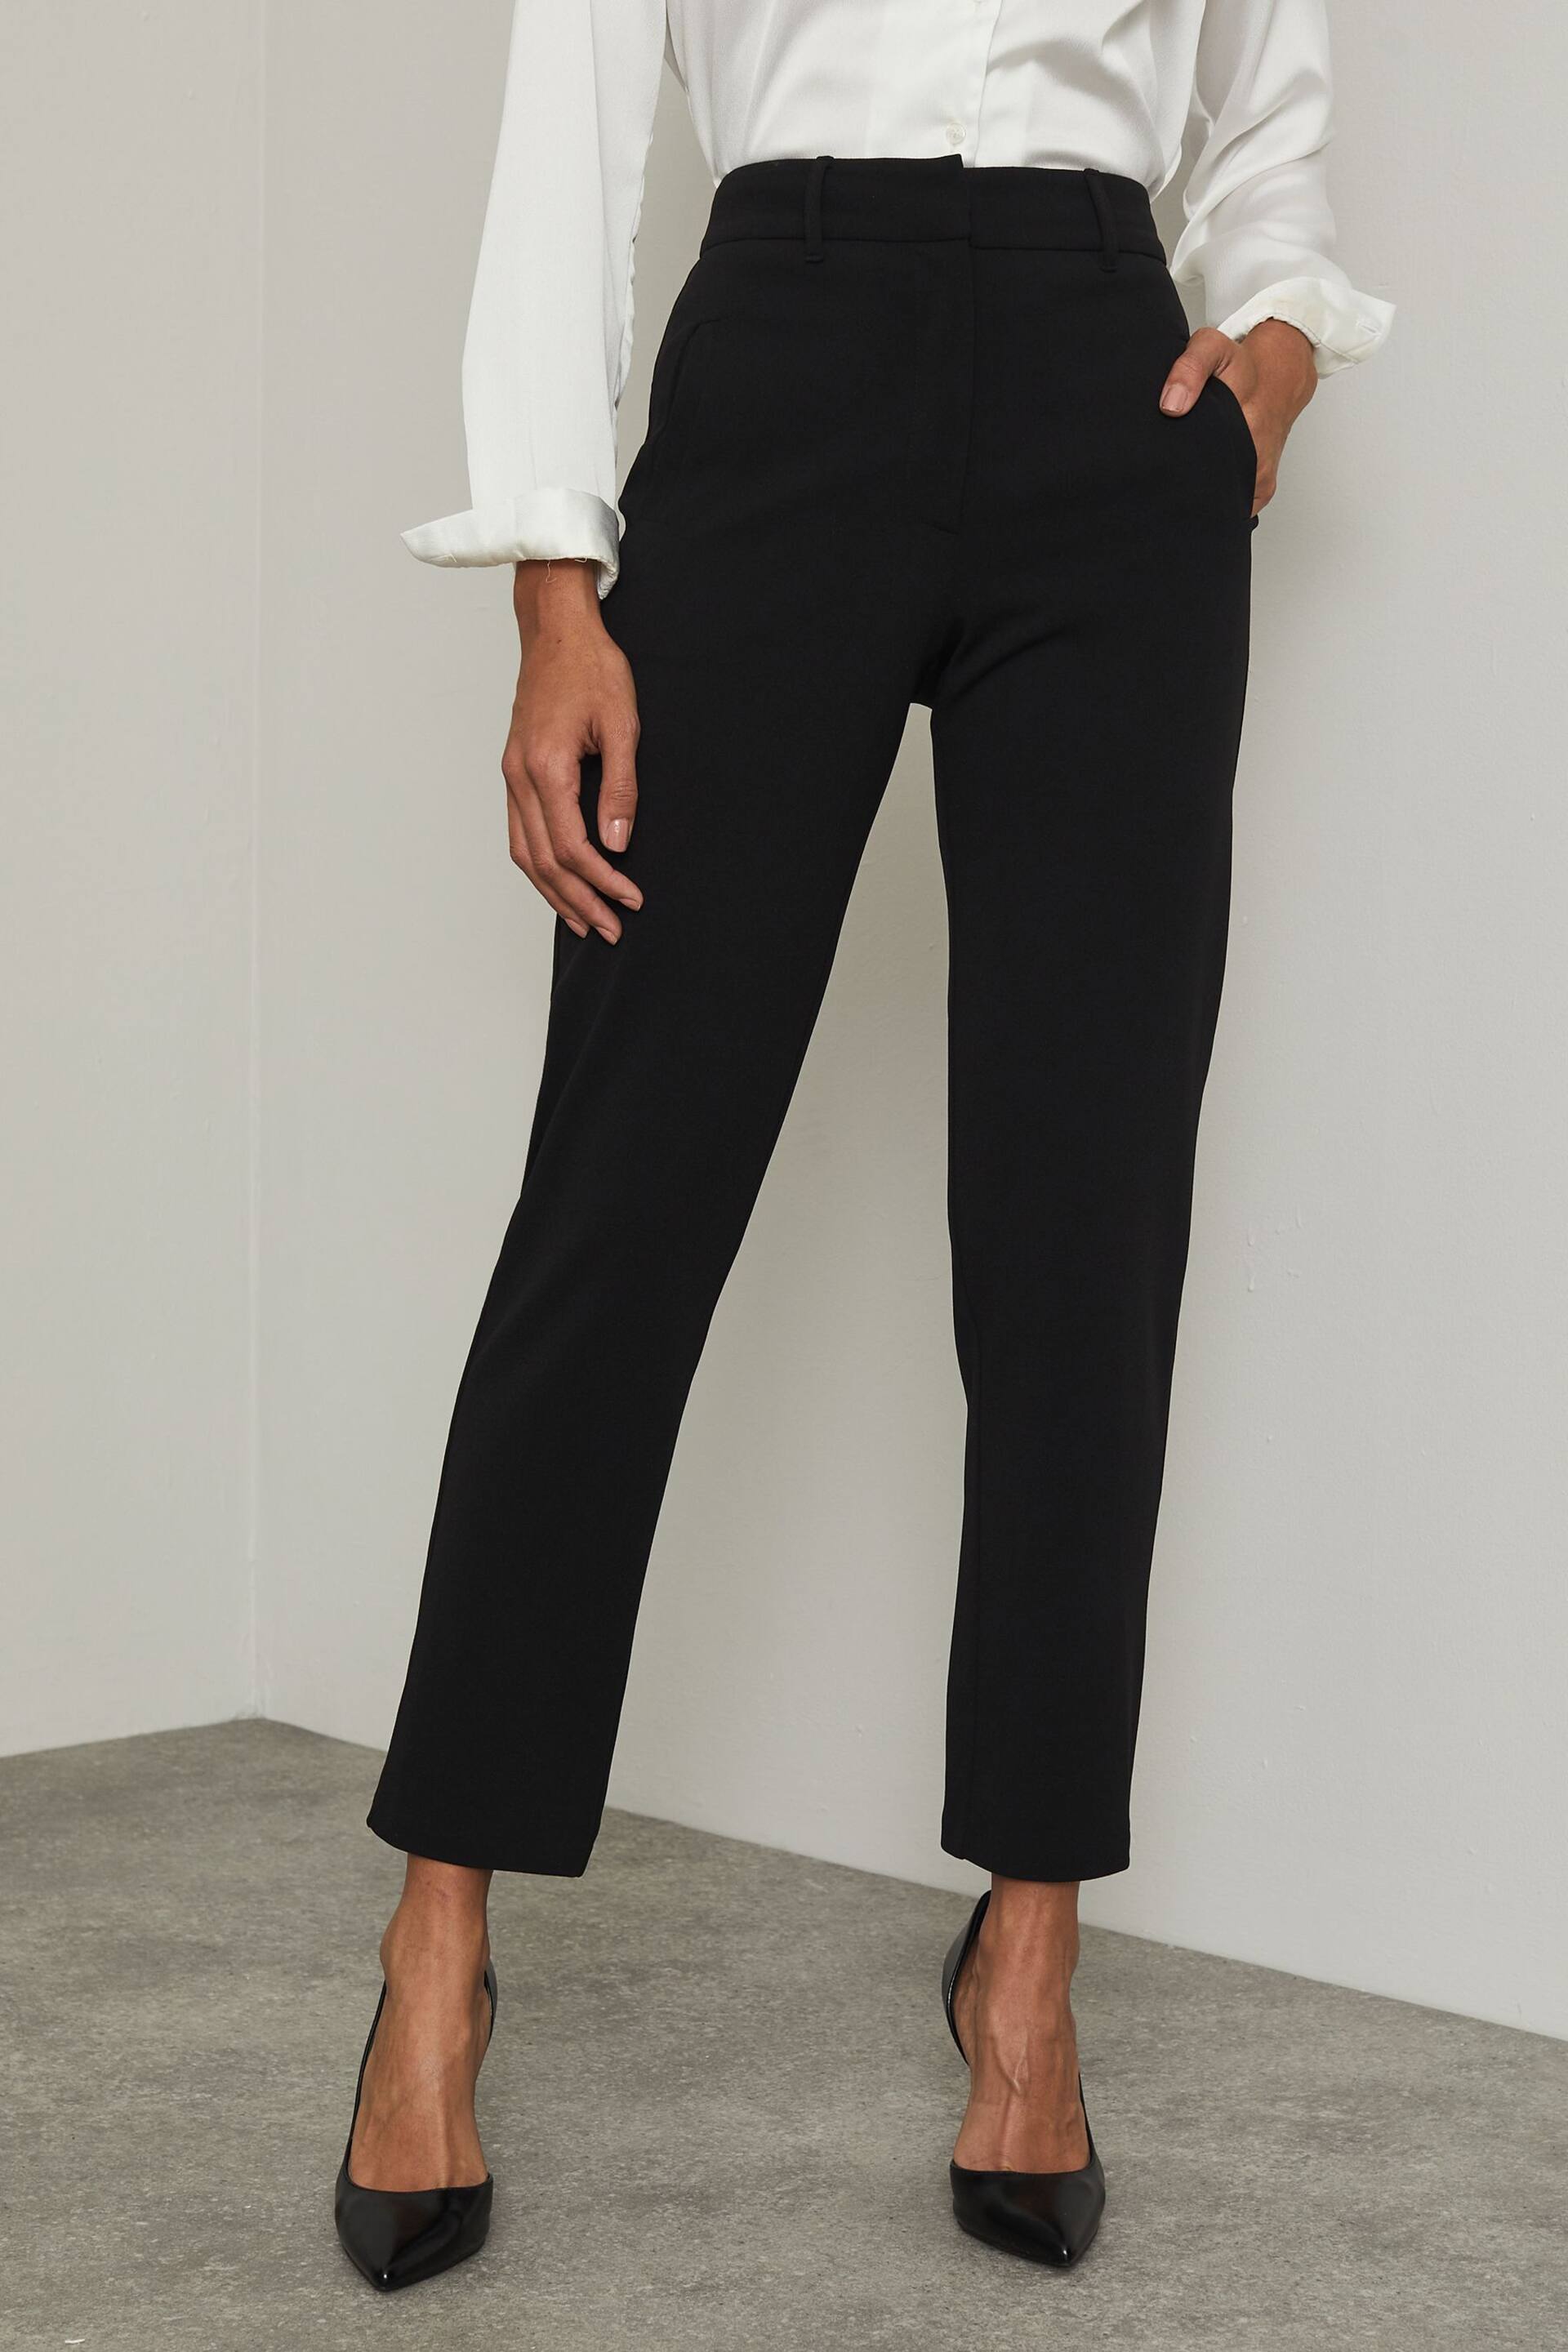 Lipsy Black Tailored Tapered Smart Trousers - Image 1 of 4